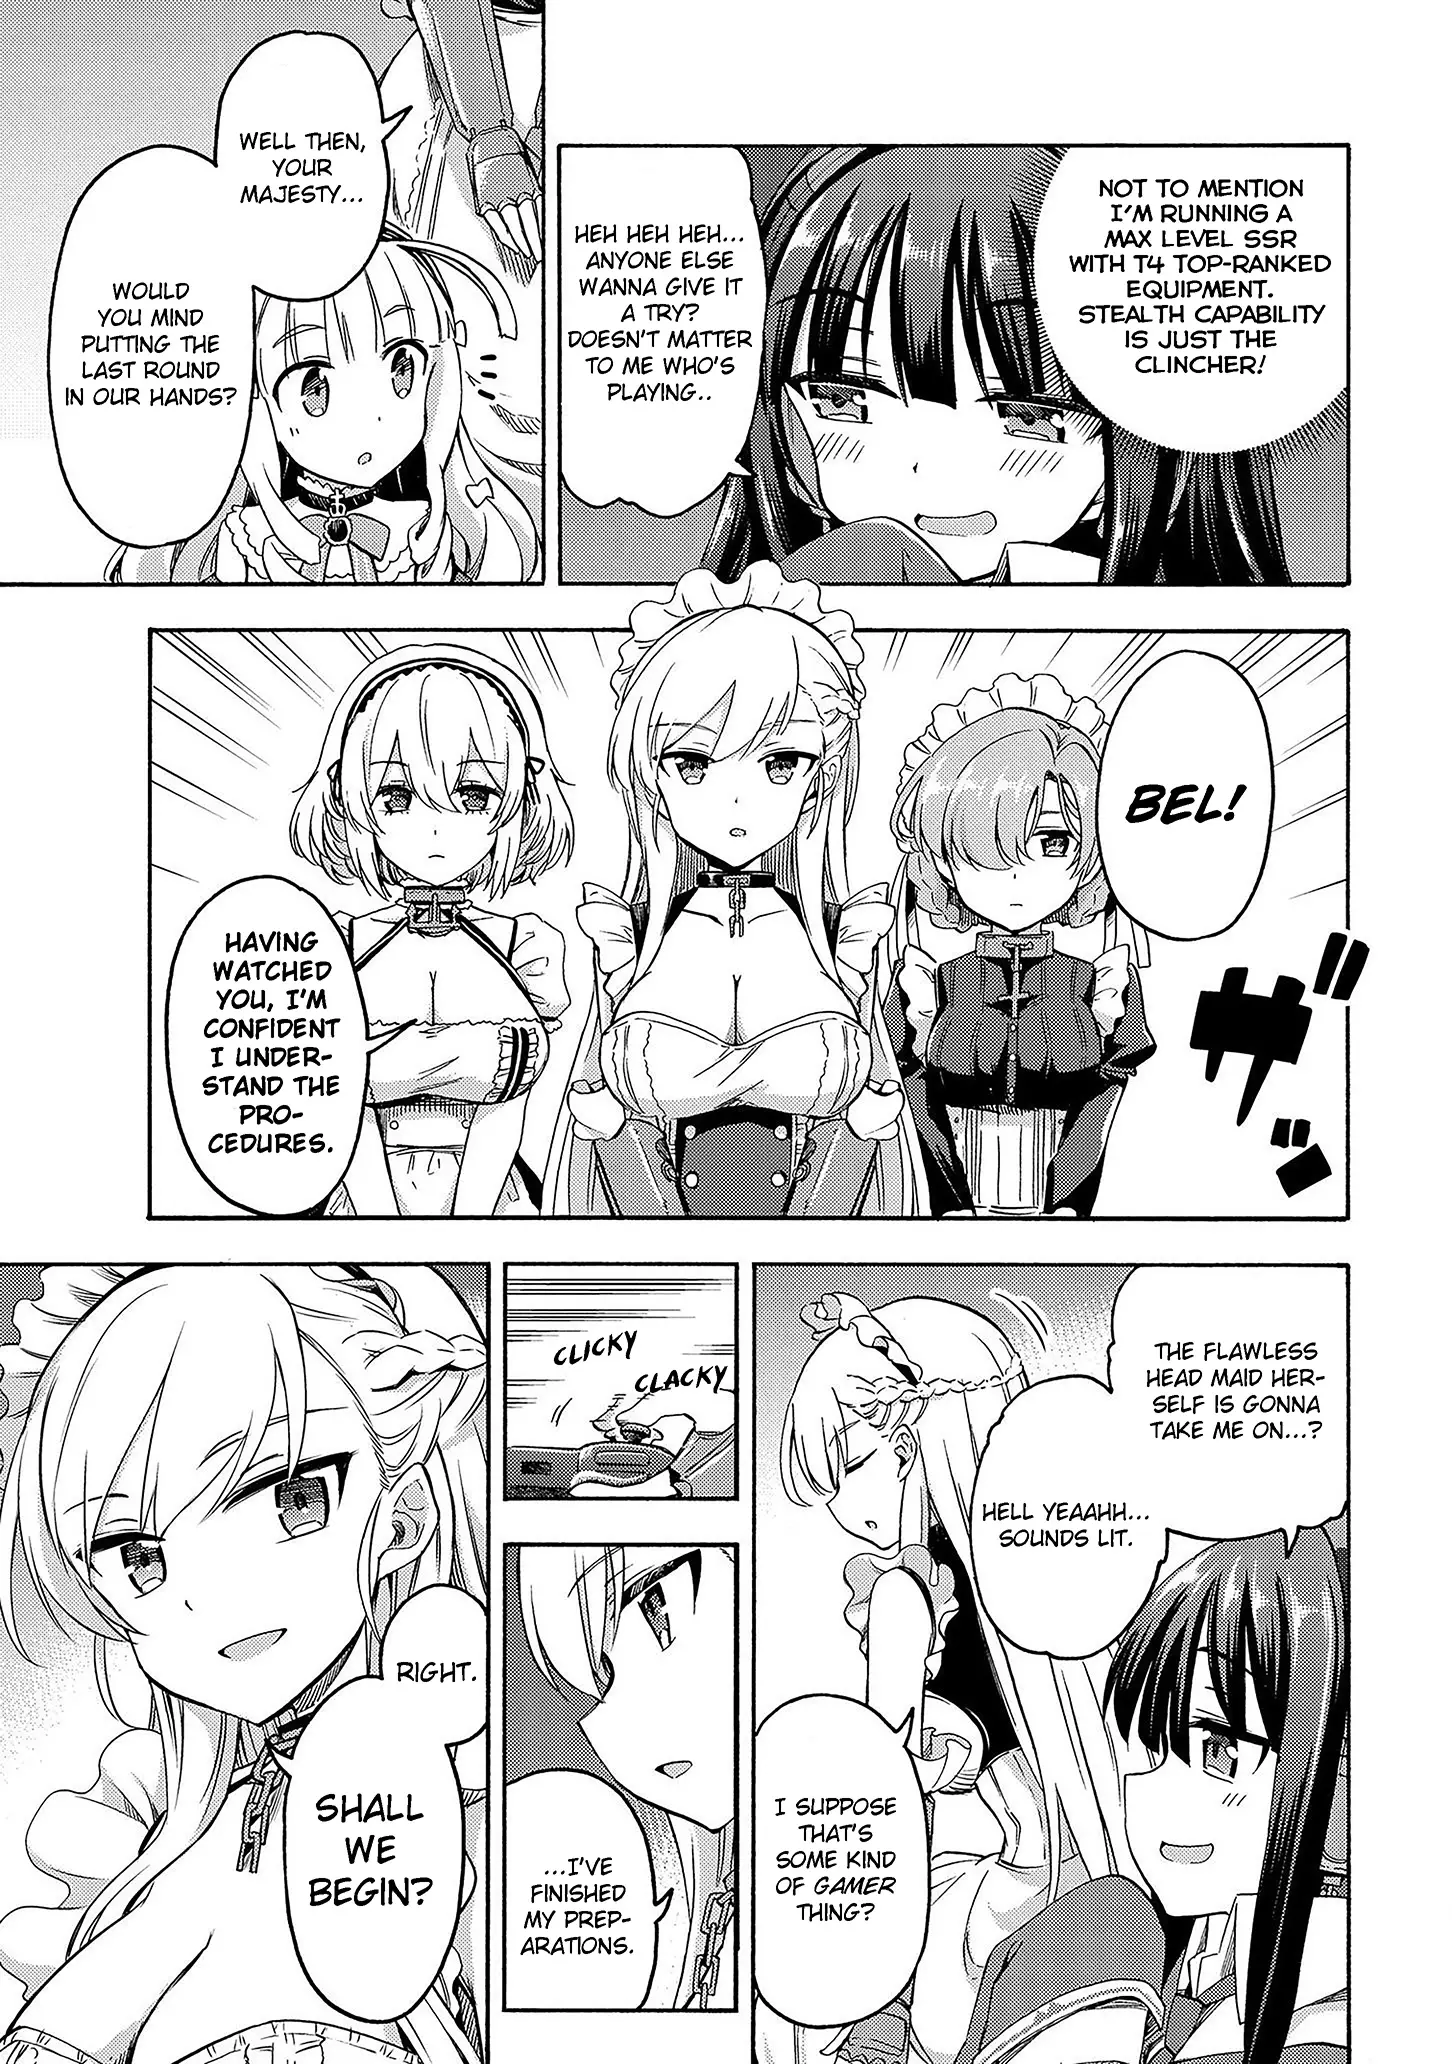 Azur Lane: Queen's Orders - 23 page 3-89ff929c